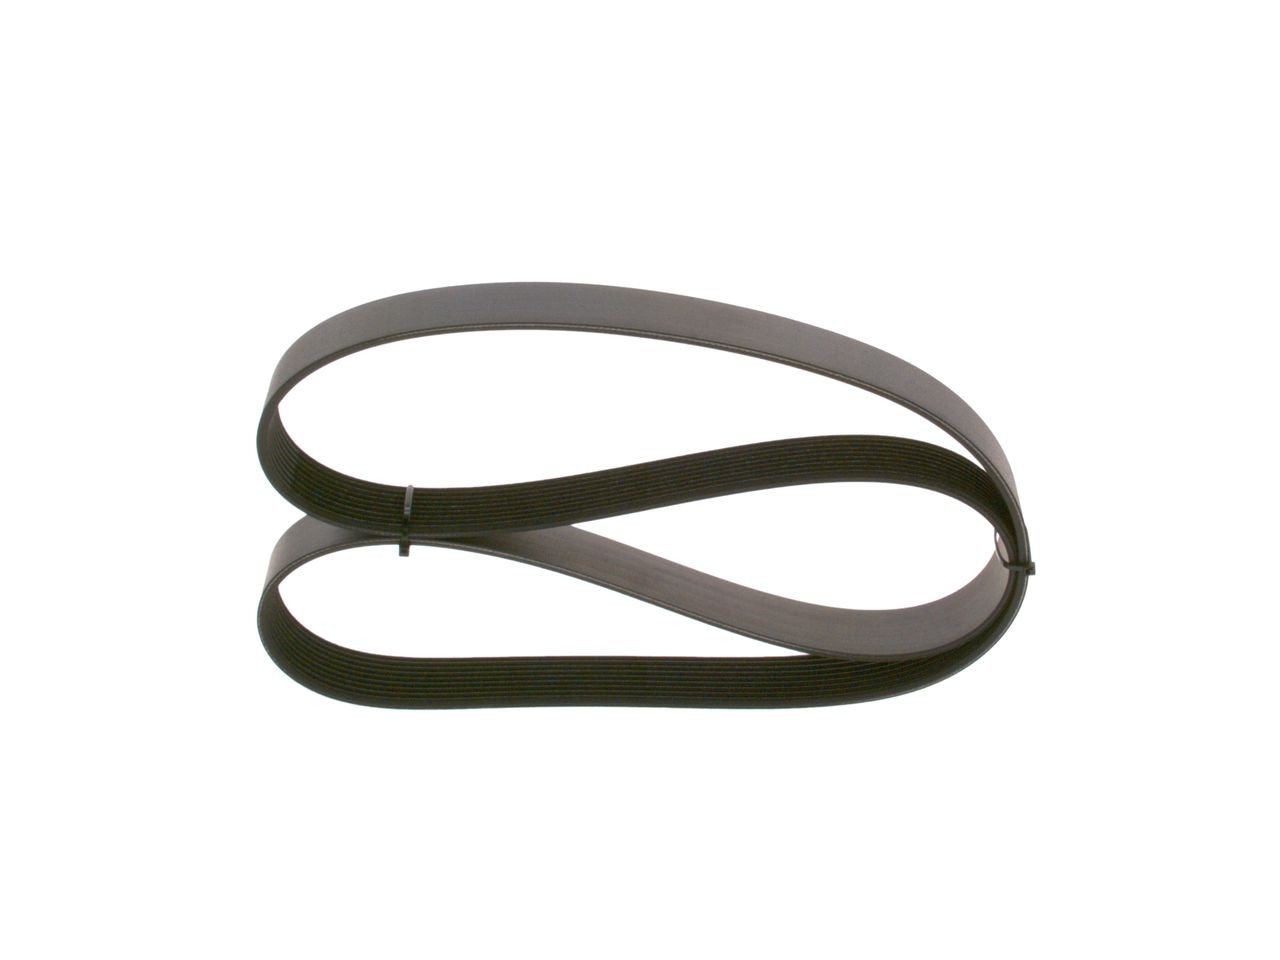 BOSCH Drive belt 1 987 947 379 – brand-name products at low prices